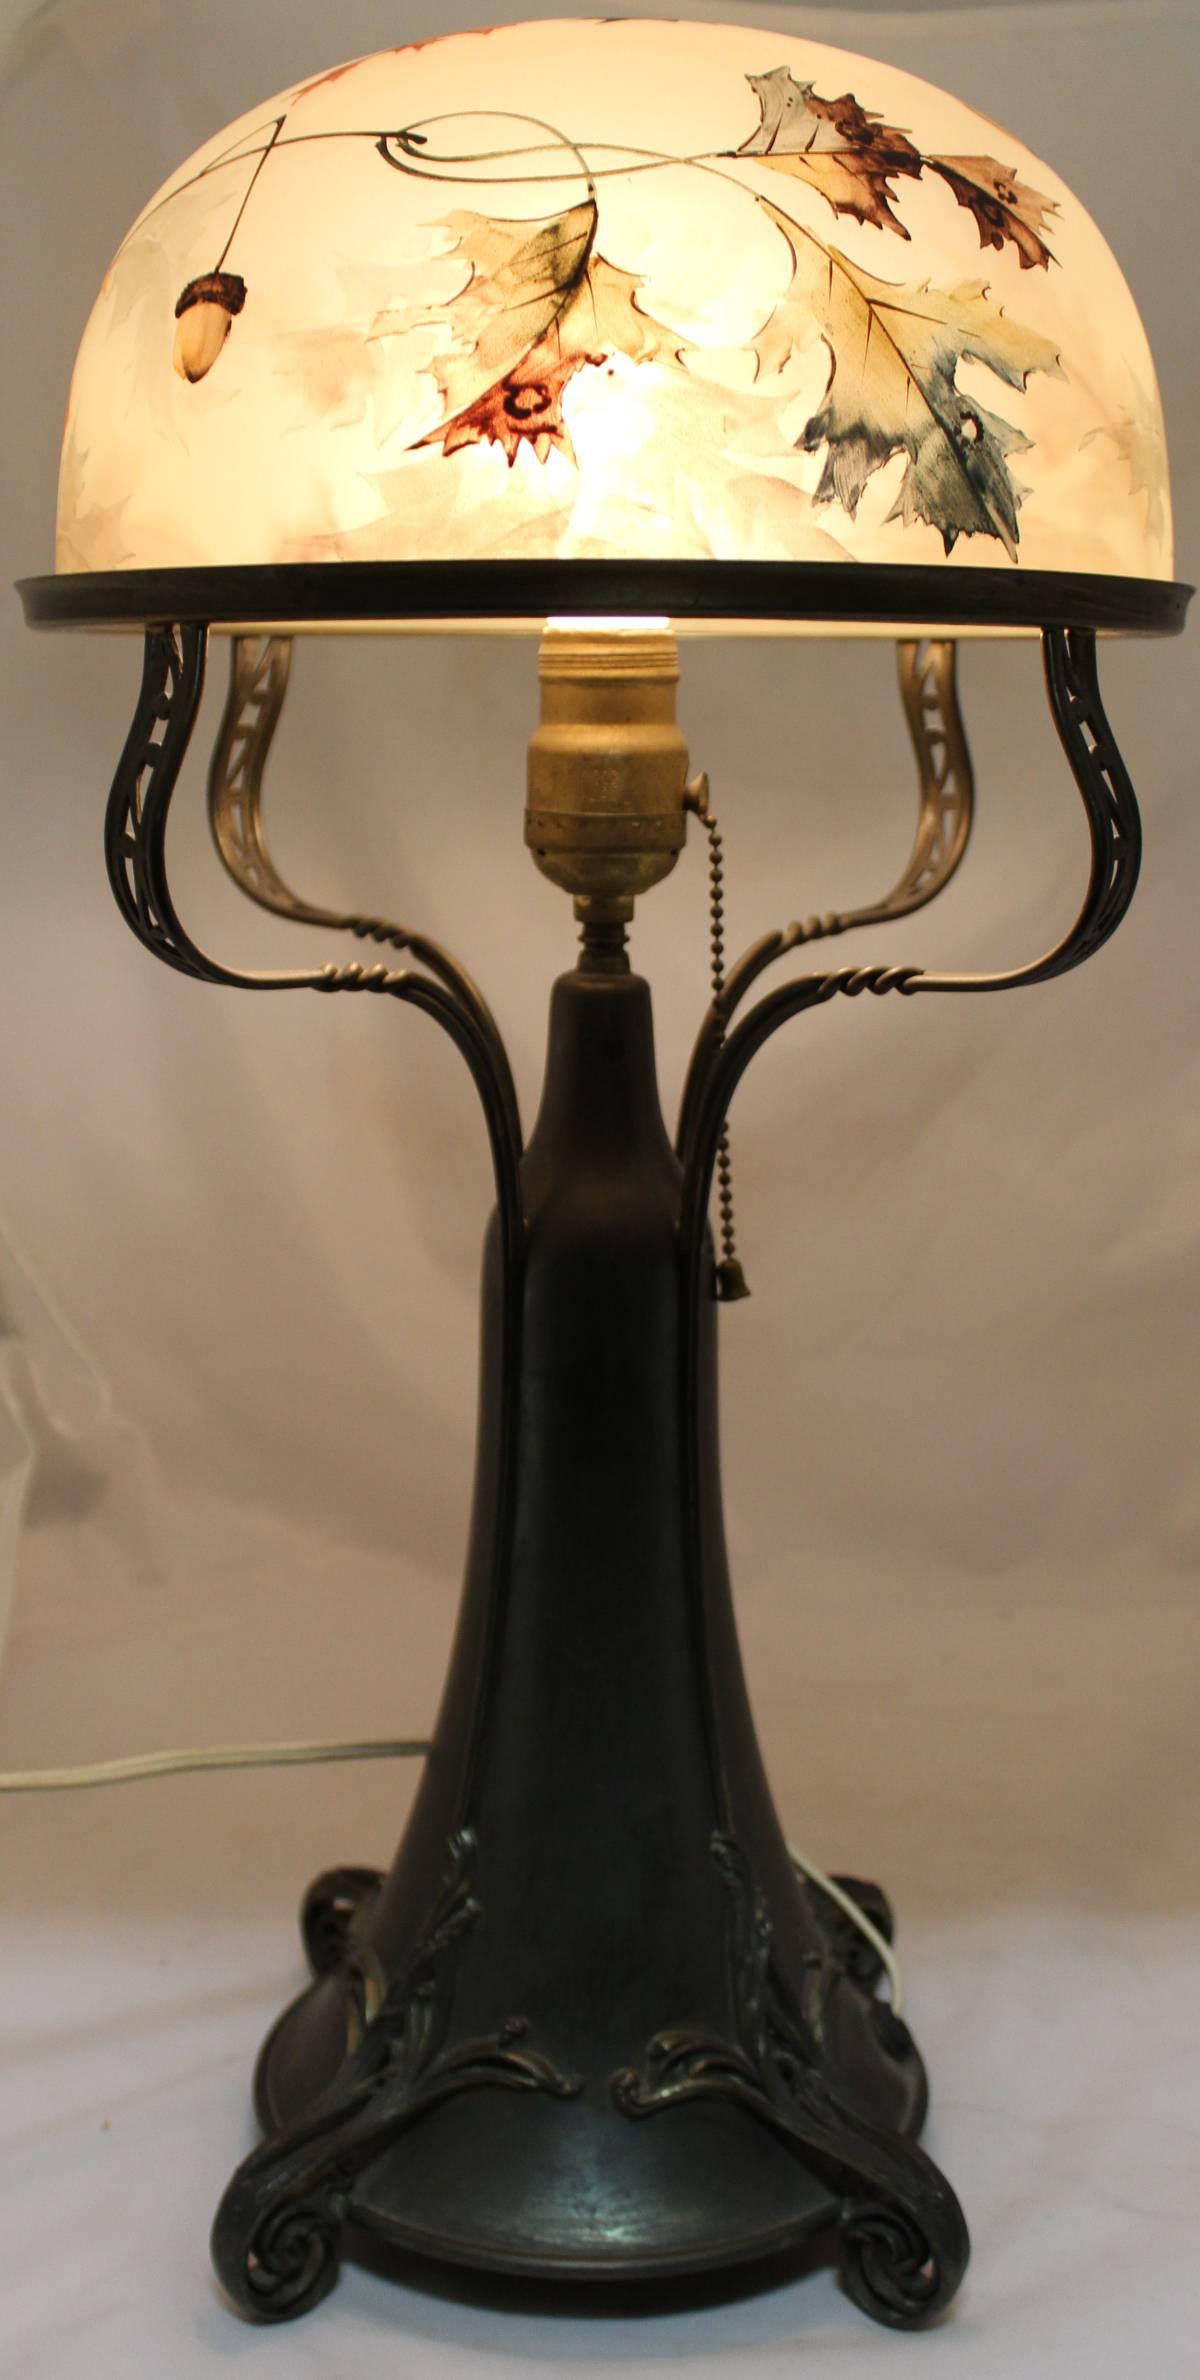 American Art Nouveau Pairpoint Dome Shade Table Lamp with Oak Leaf and Acorn Motif